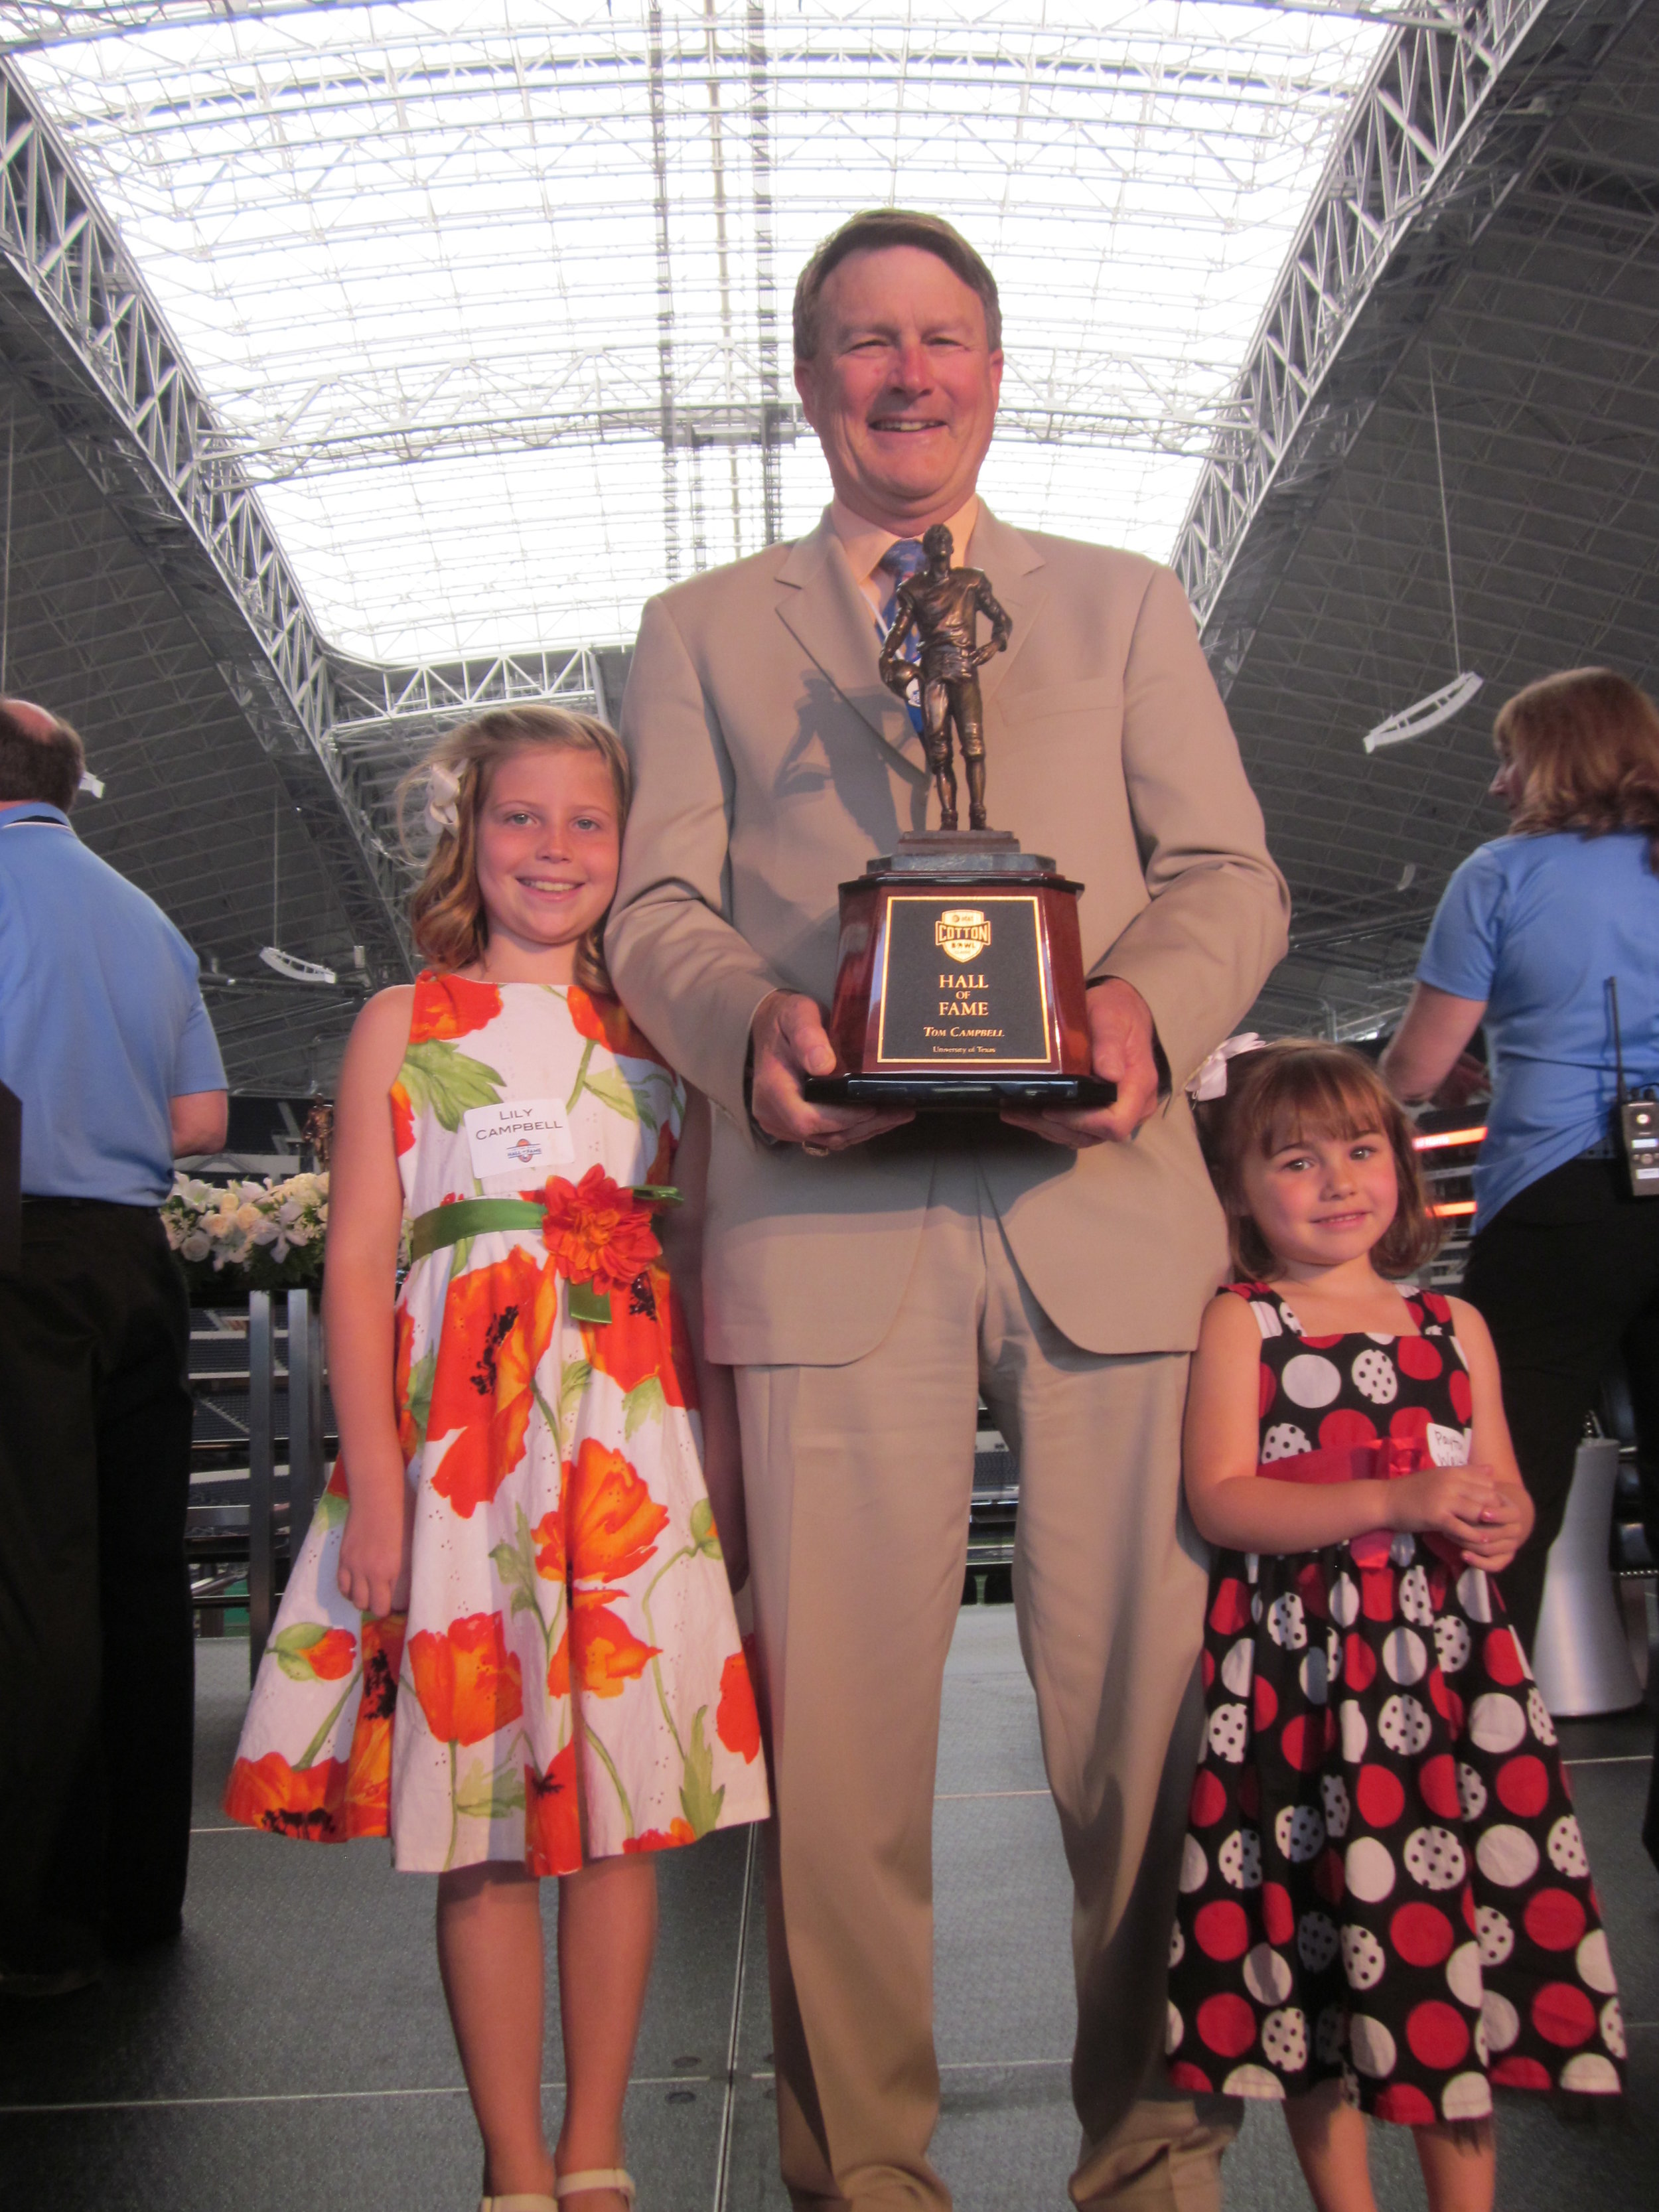 Tom Campbell's induction into the Cotton Bowl Hall of Fame